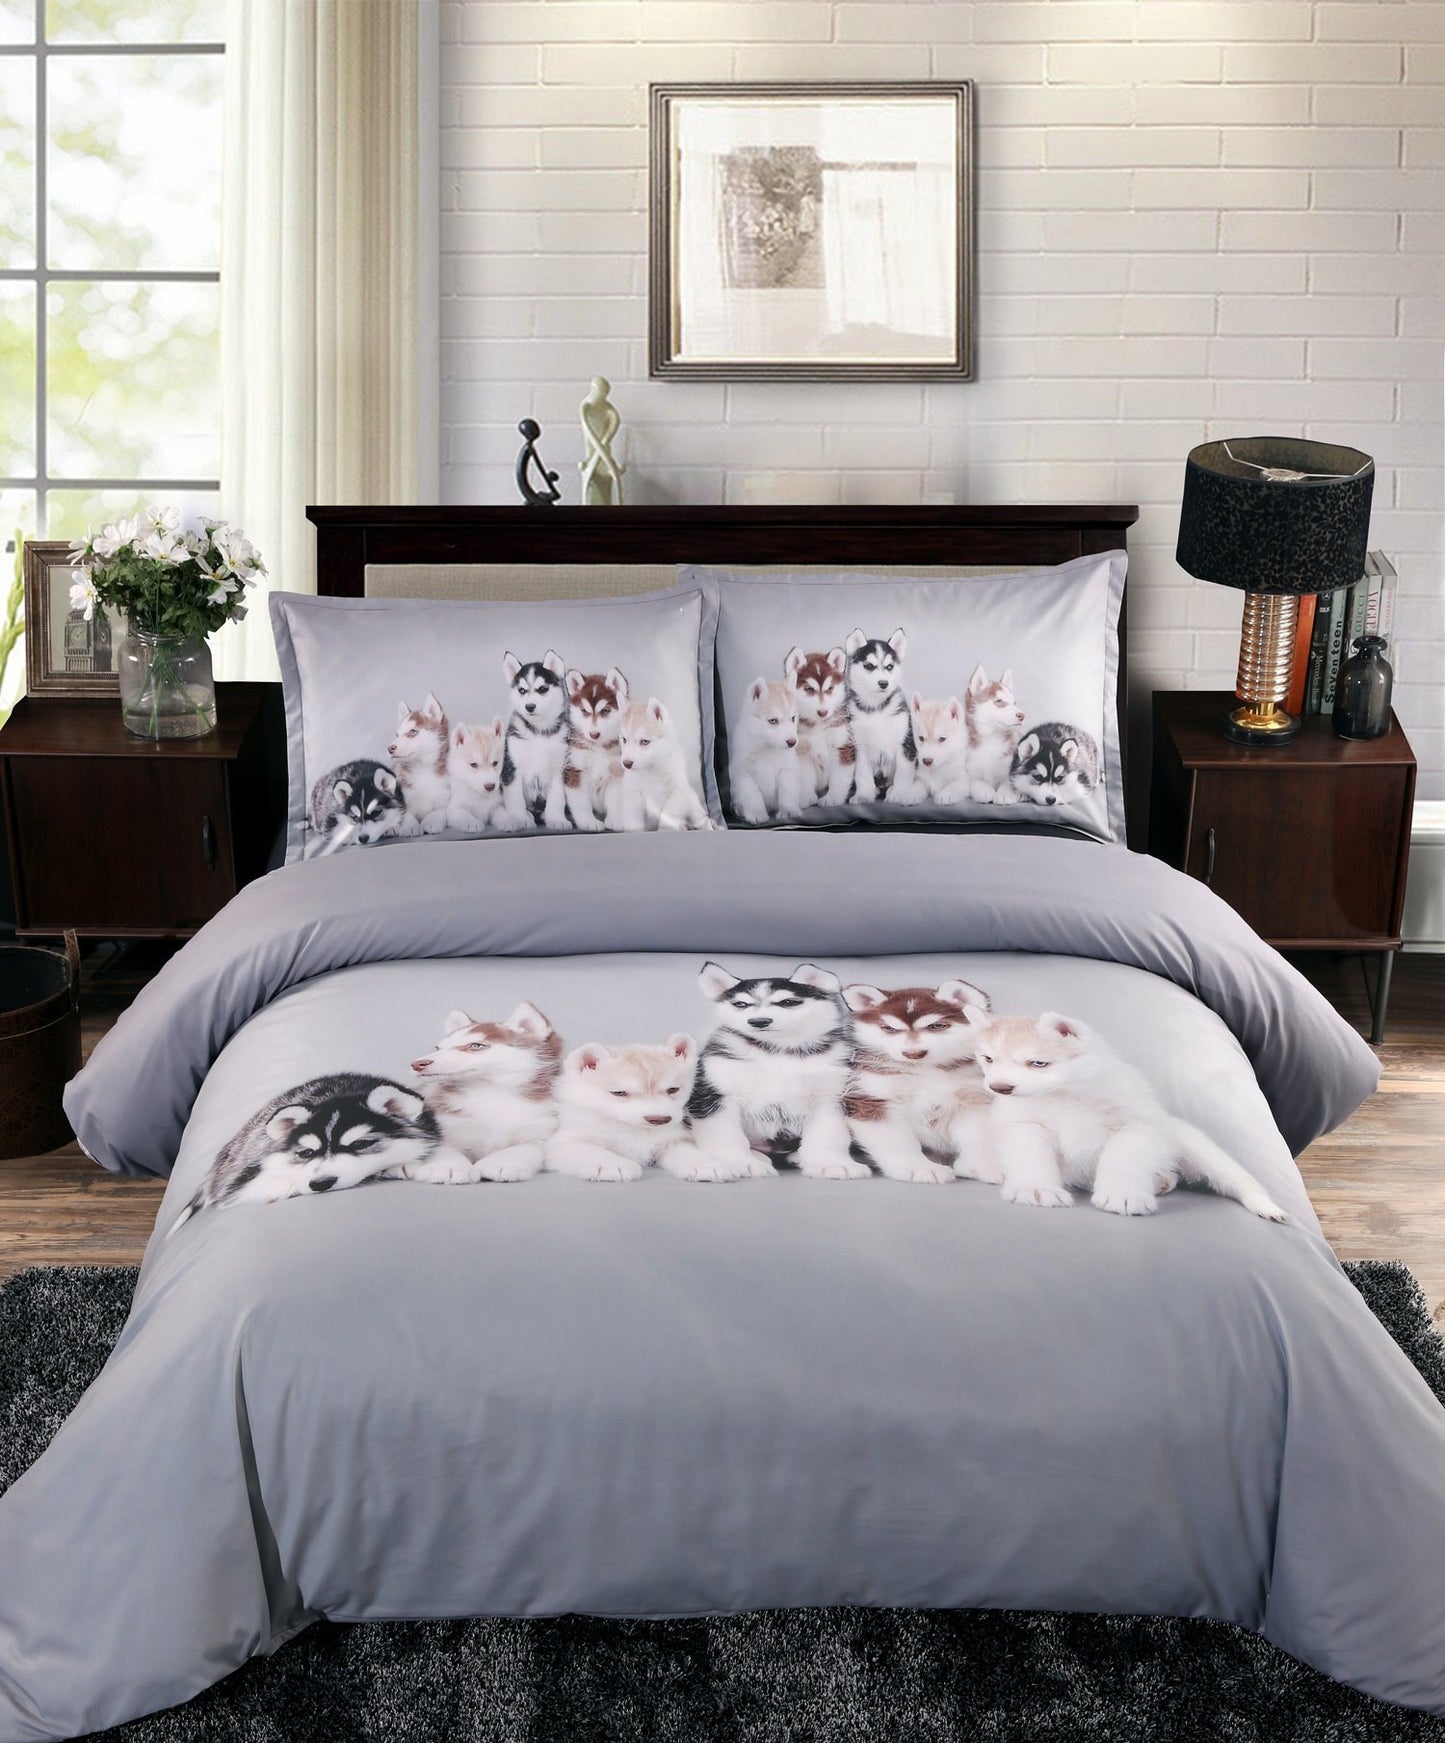 3D Husky Puppies Digital Printing 5-Piece Lightweight Warm Zipper Comforter Set with White Down Quilt for Spring and Summer